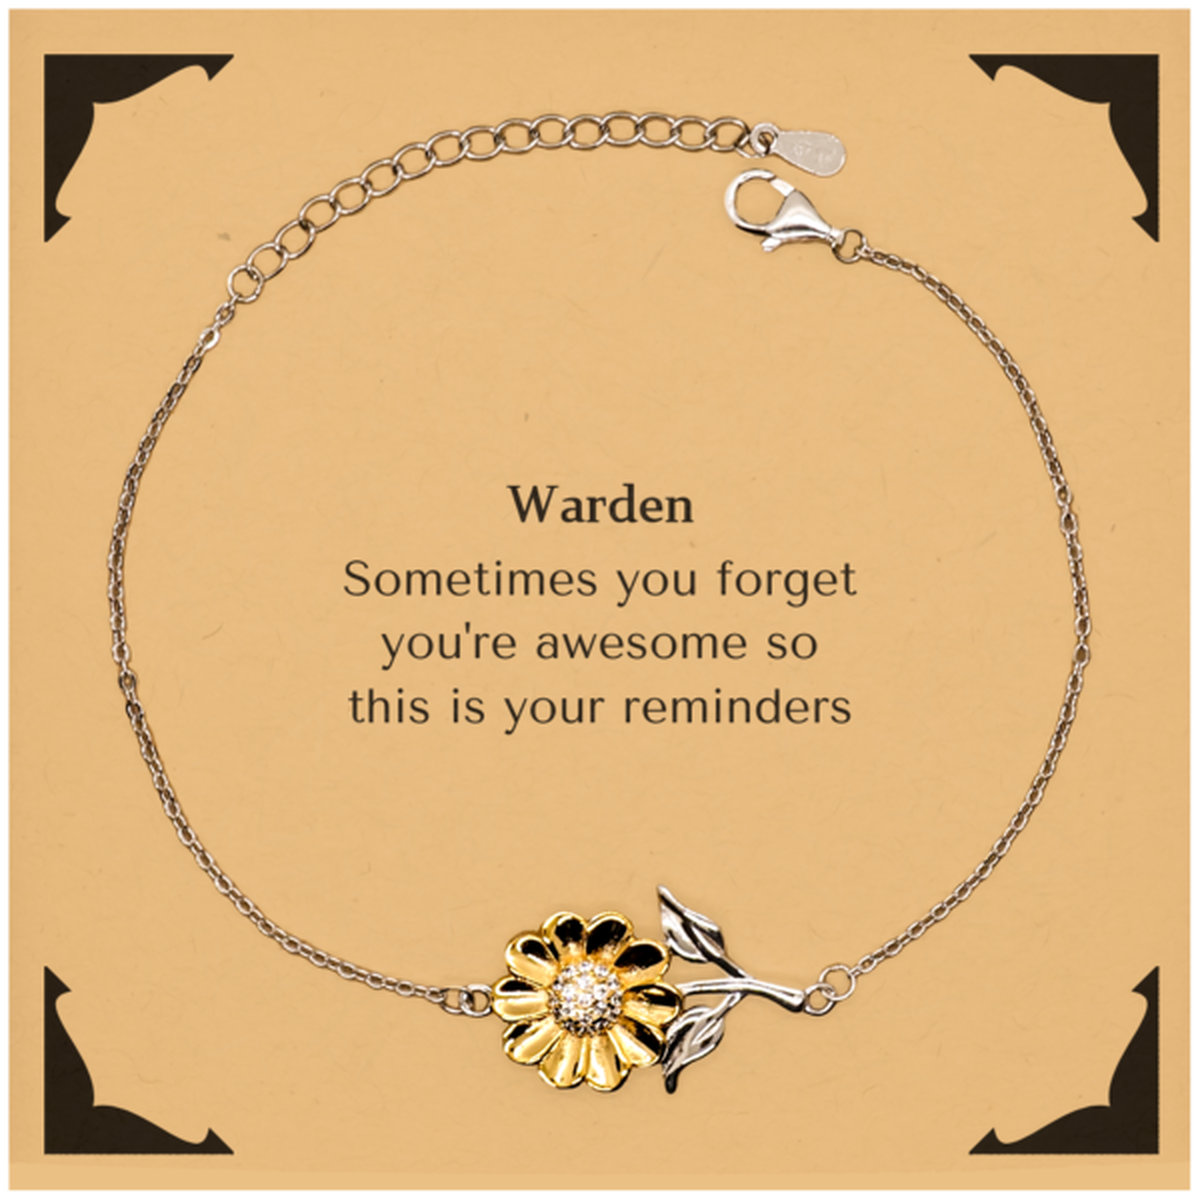 Sentimental Warden Sunflower Bracelet, Warden Sometimes you forget you're awesome so this is your reminders, Graduation Christmas Birthday Gifts for Warden, Men, Women, Coworkers